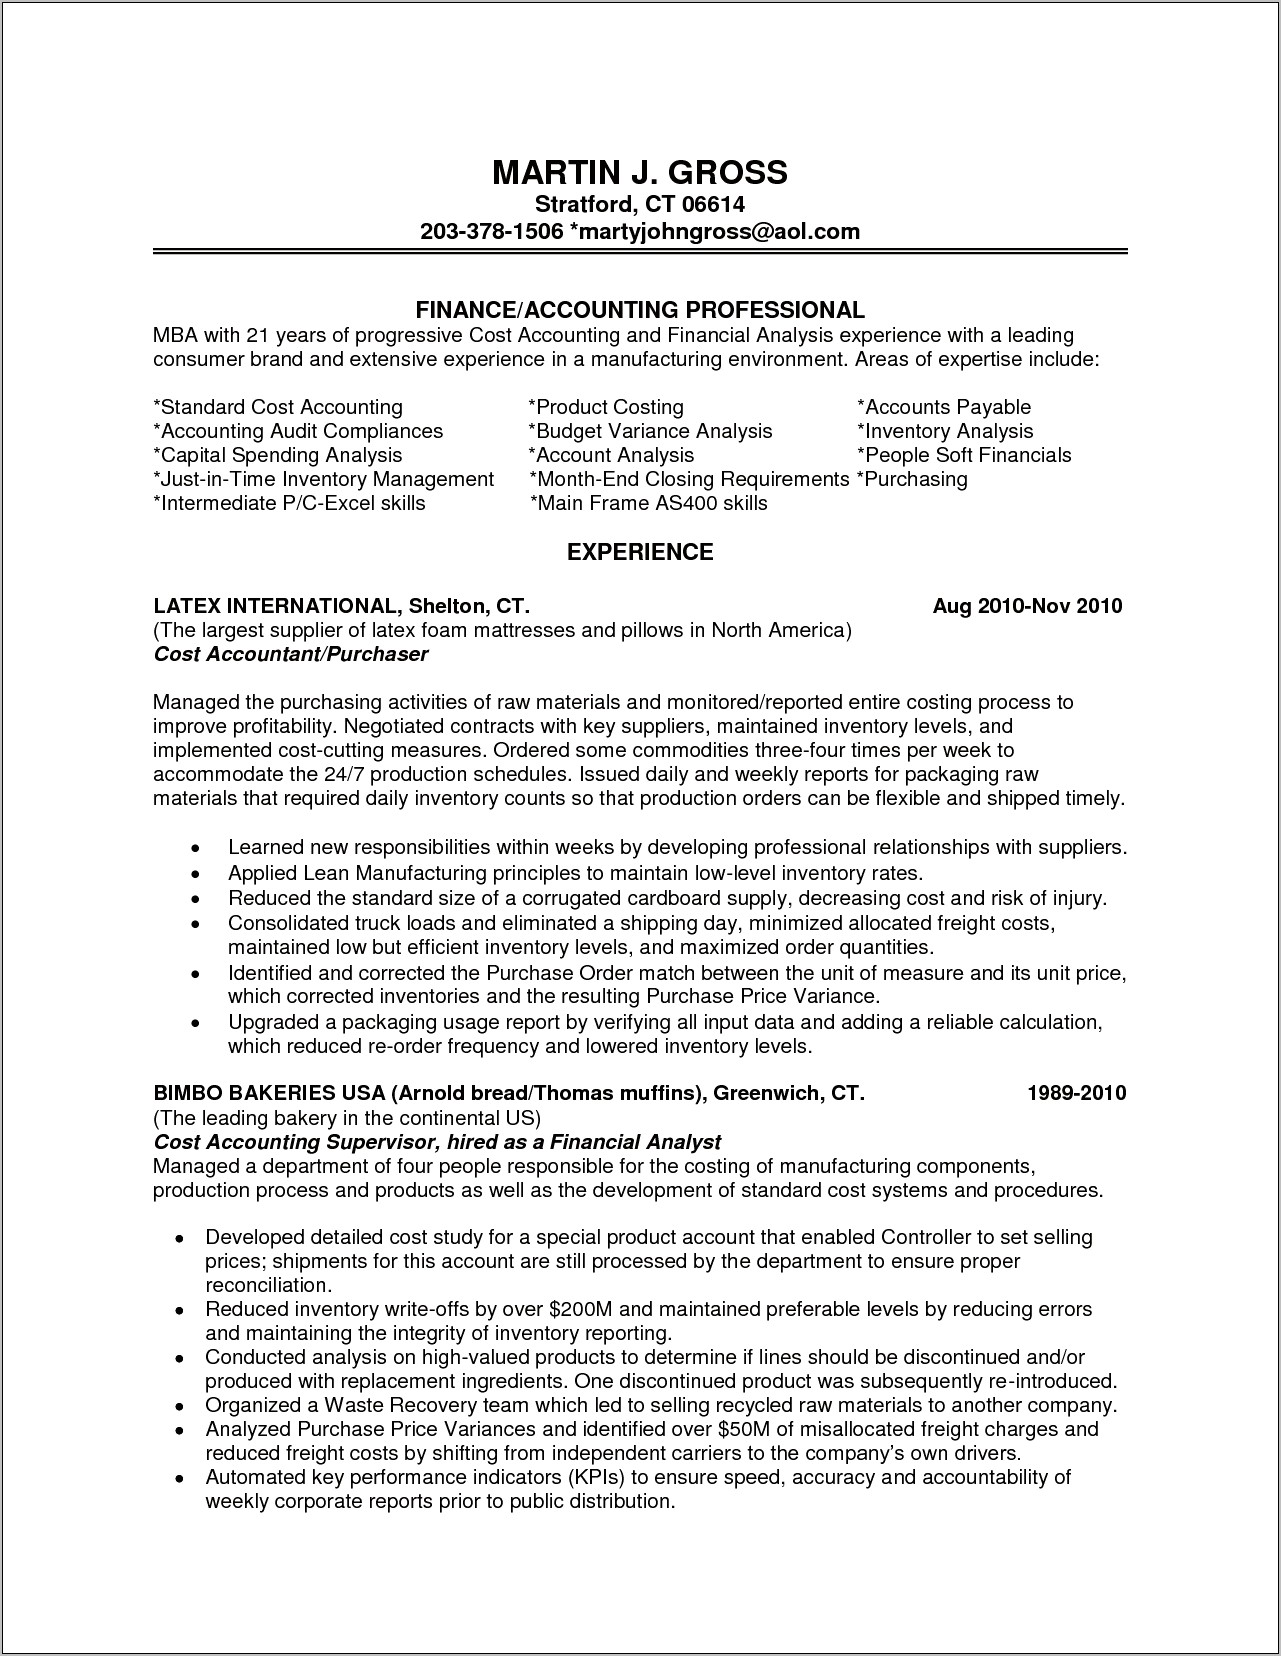 Resume Objective Examples Entry Level Accounting